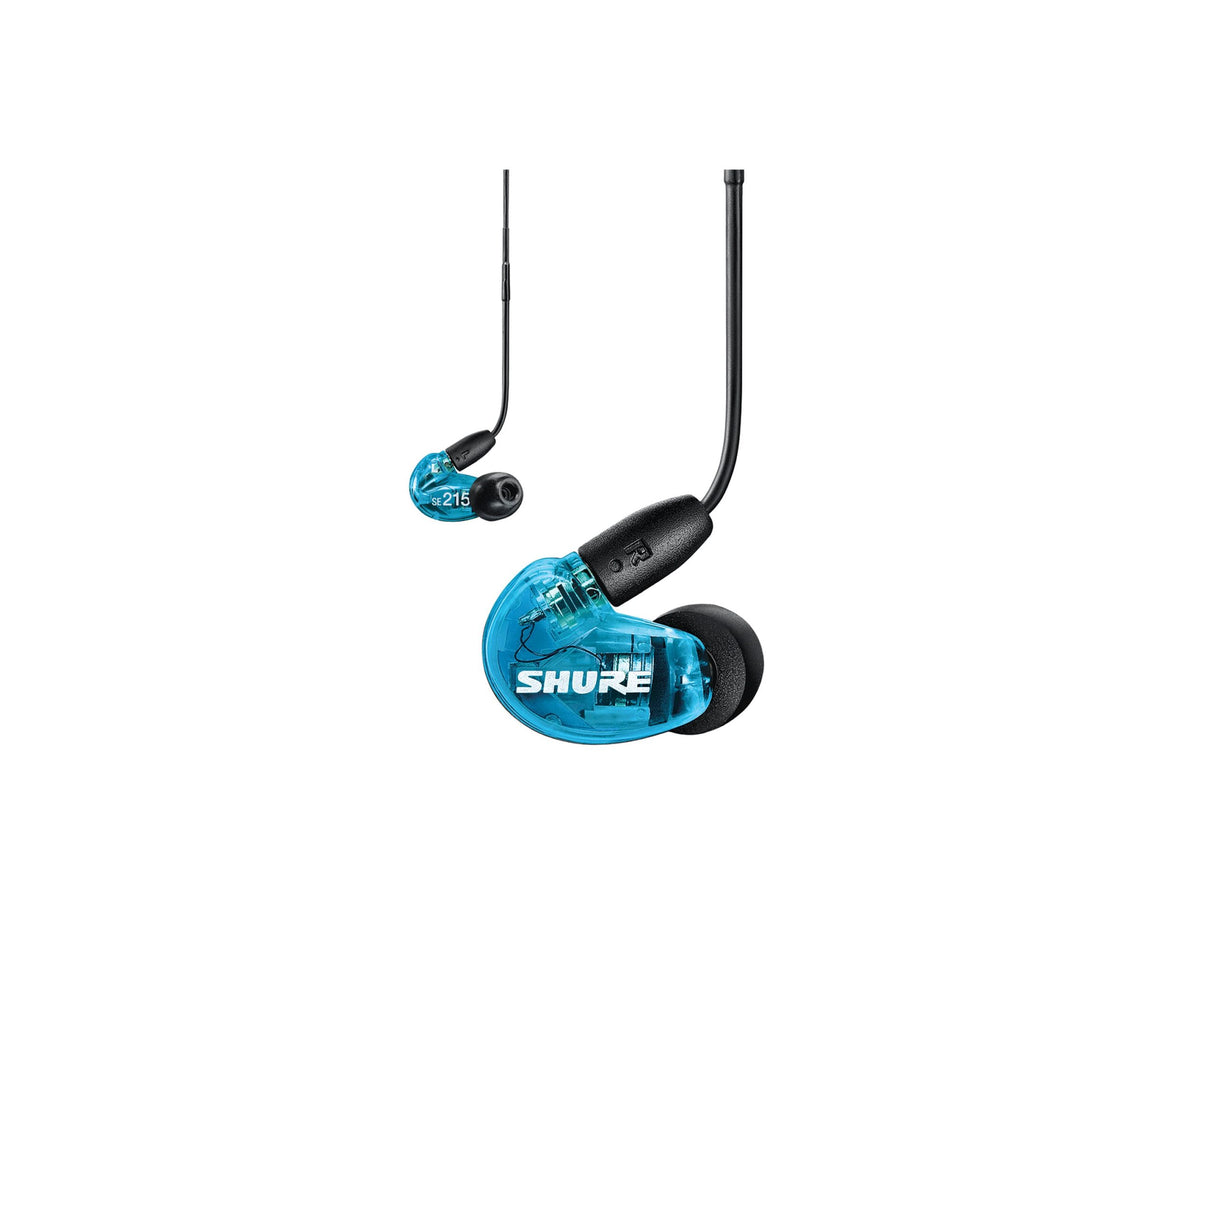 Shure SE215 Special Edition In-Ear Sound Isolating Earphone with Universal 3.5mm Remote + Mic for Apple / Android, Blue Special Edition